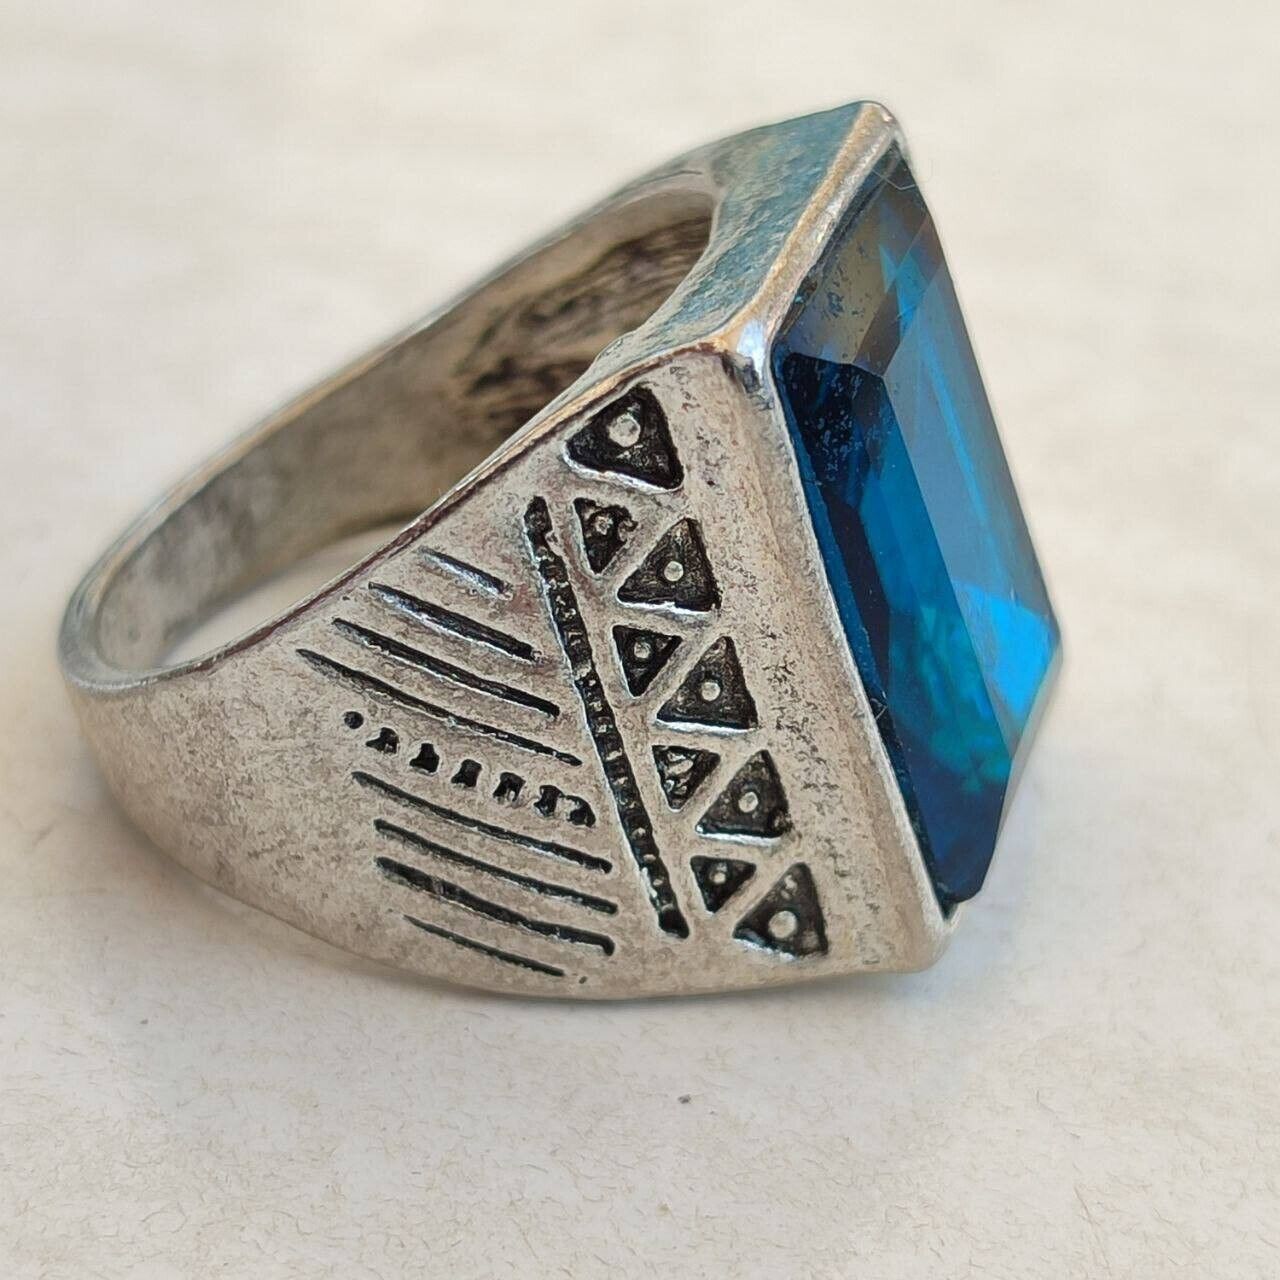 Very Stunning Ancient Antique Silver Ring Viking Blue Stone Amazing Artifact